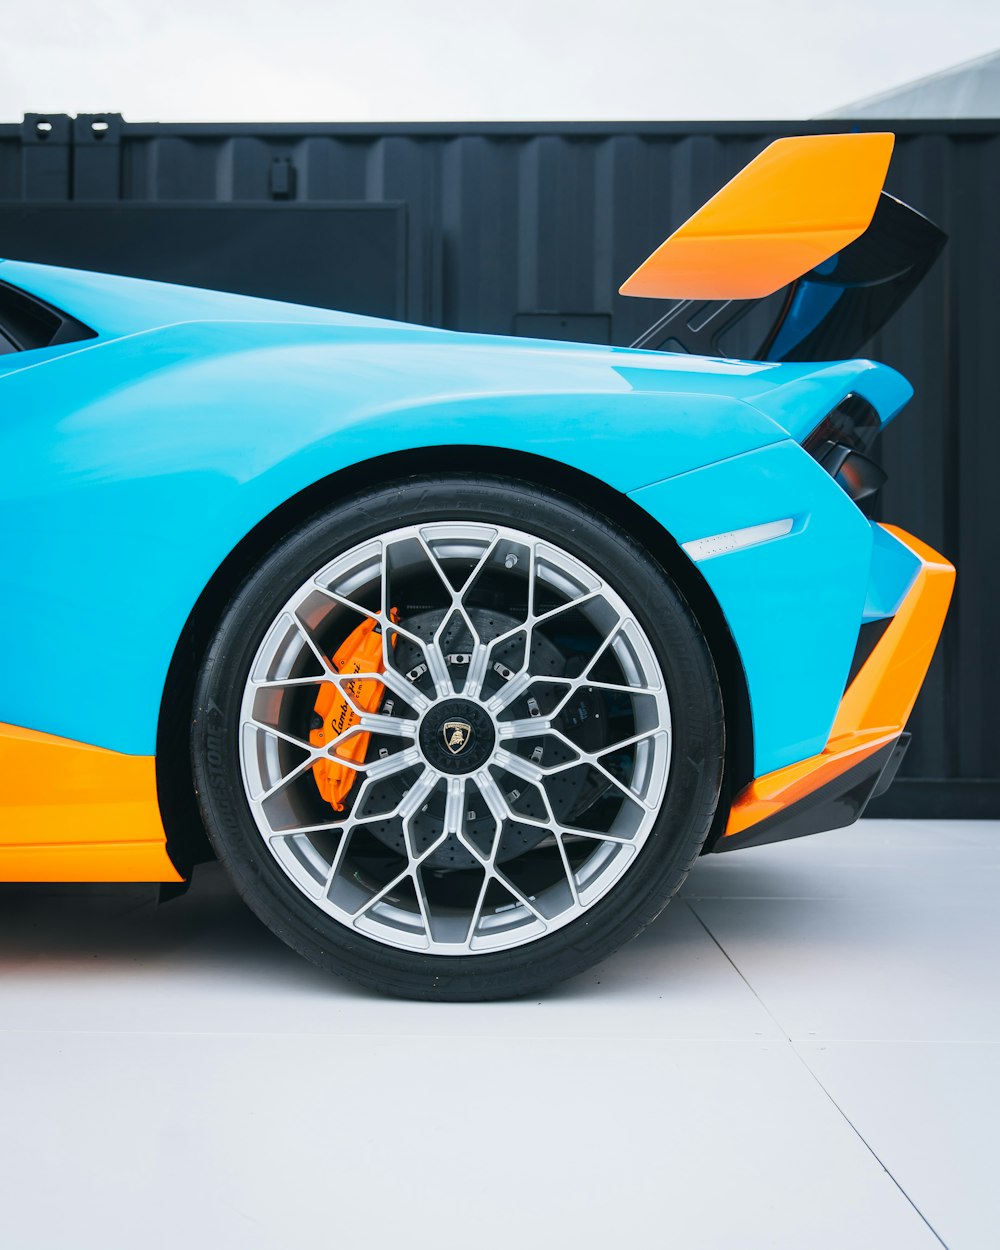 a blue and orange sports car parked in a garage